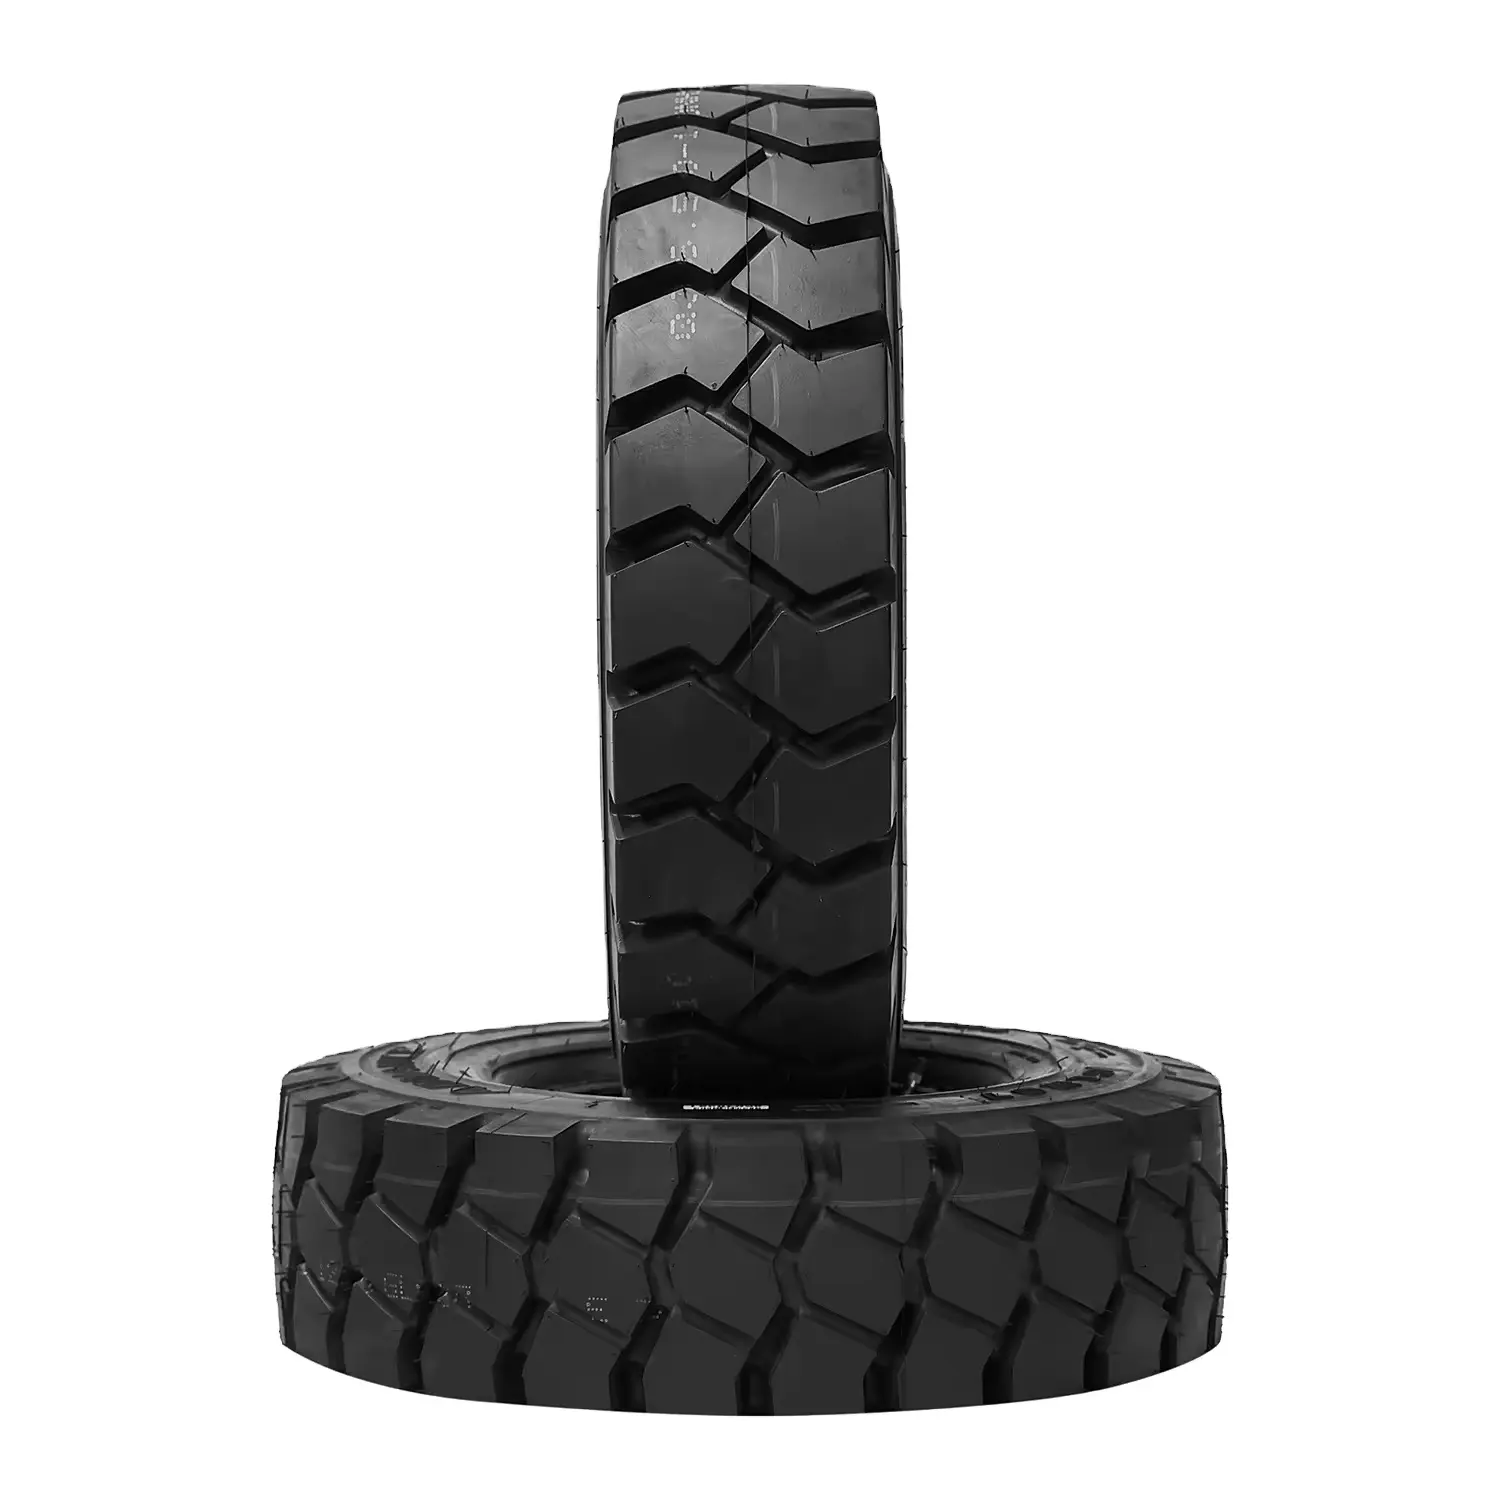 9 00-16/6.50 9.00-20/7.0 solid internal combustion forklift tire with rim protection function